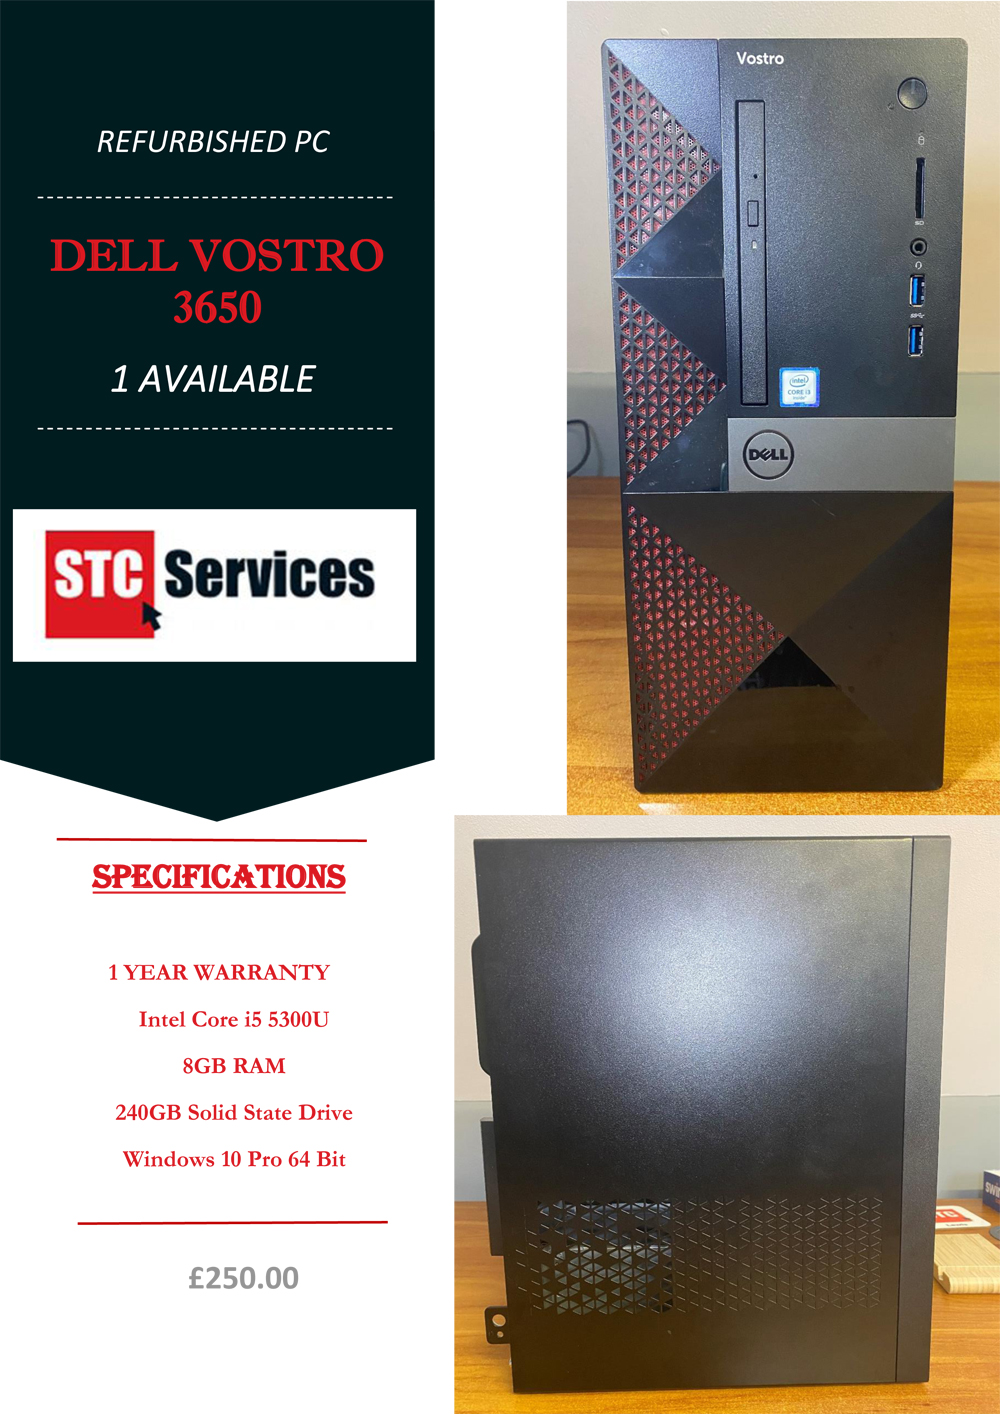 Please click for more details of this Dell Vostro 3650